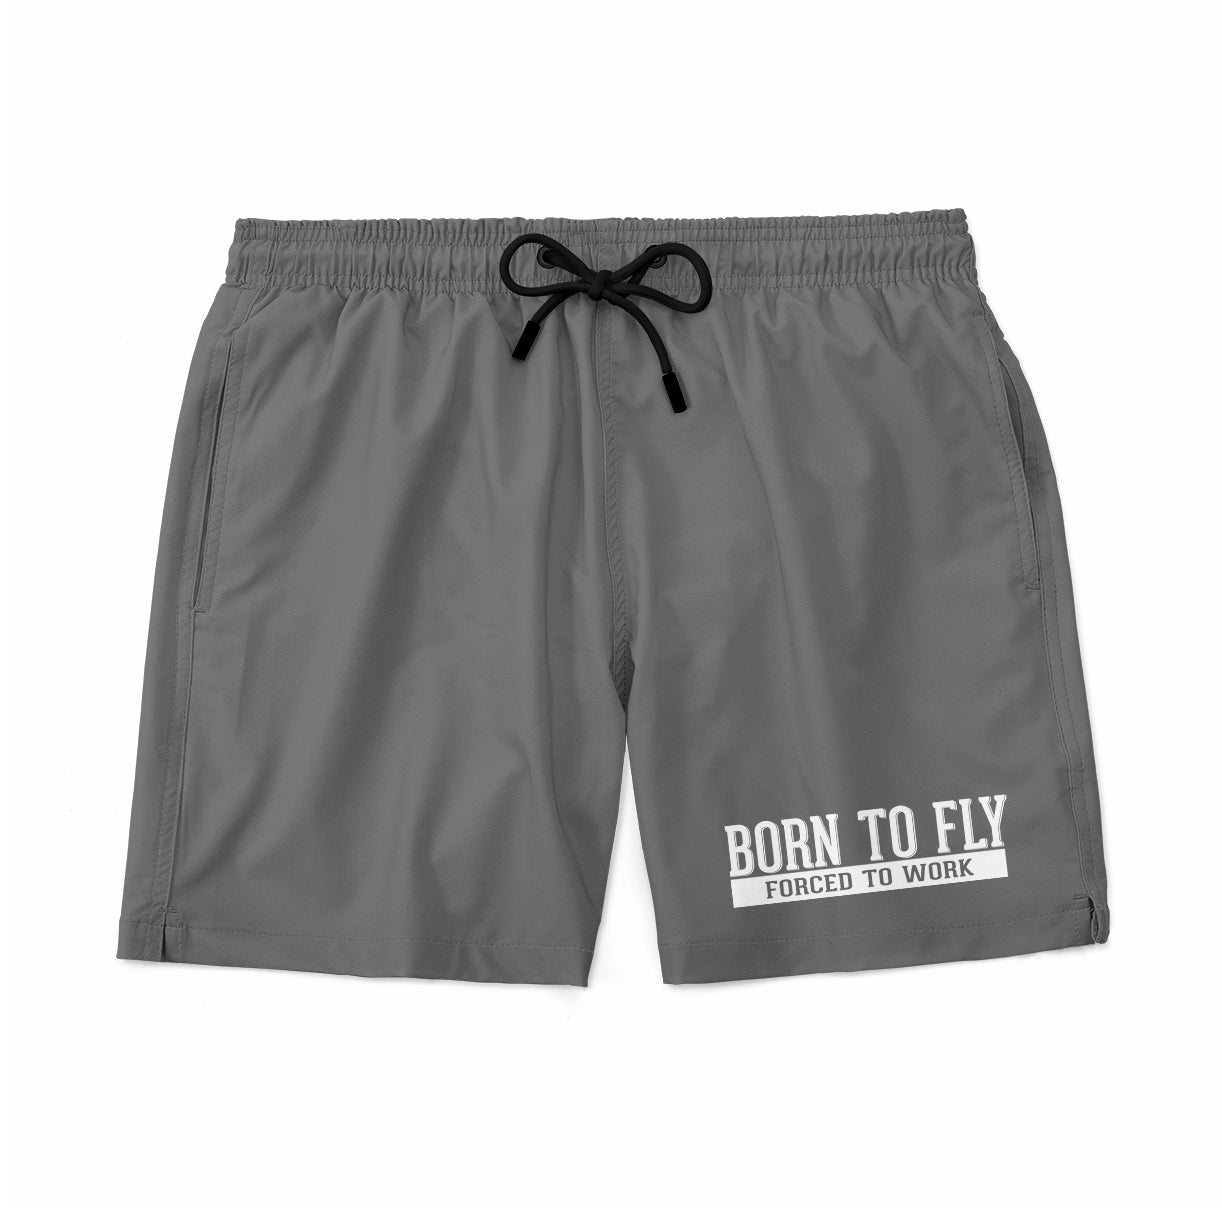 Born To Fly Forced To Work Designed Swim Trunks & Shorts